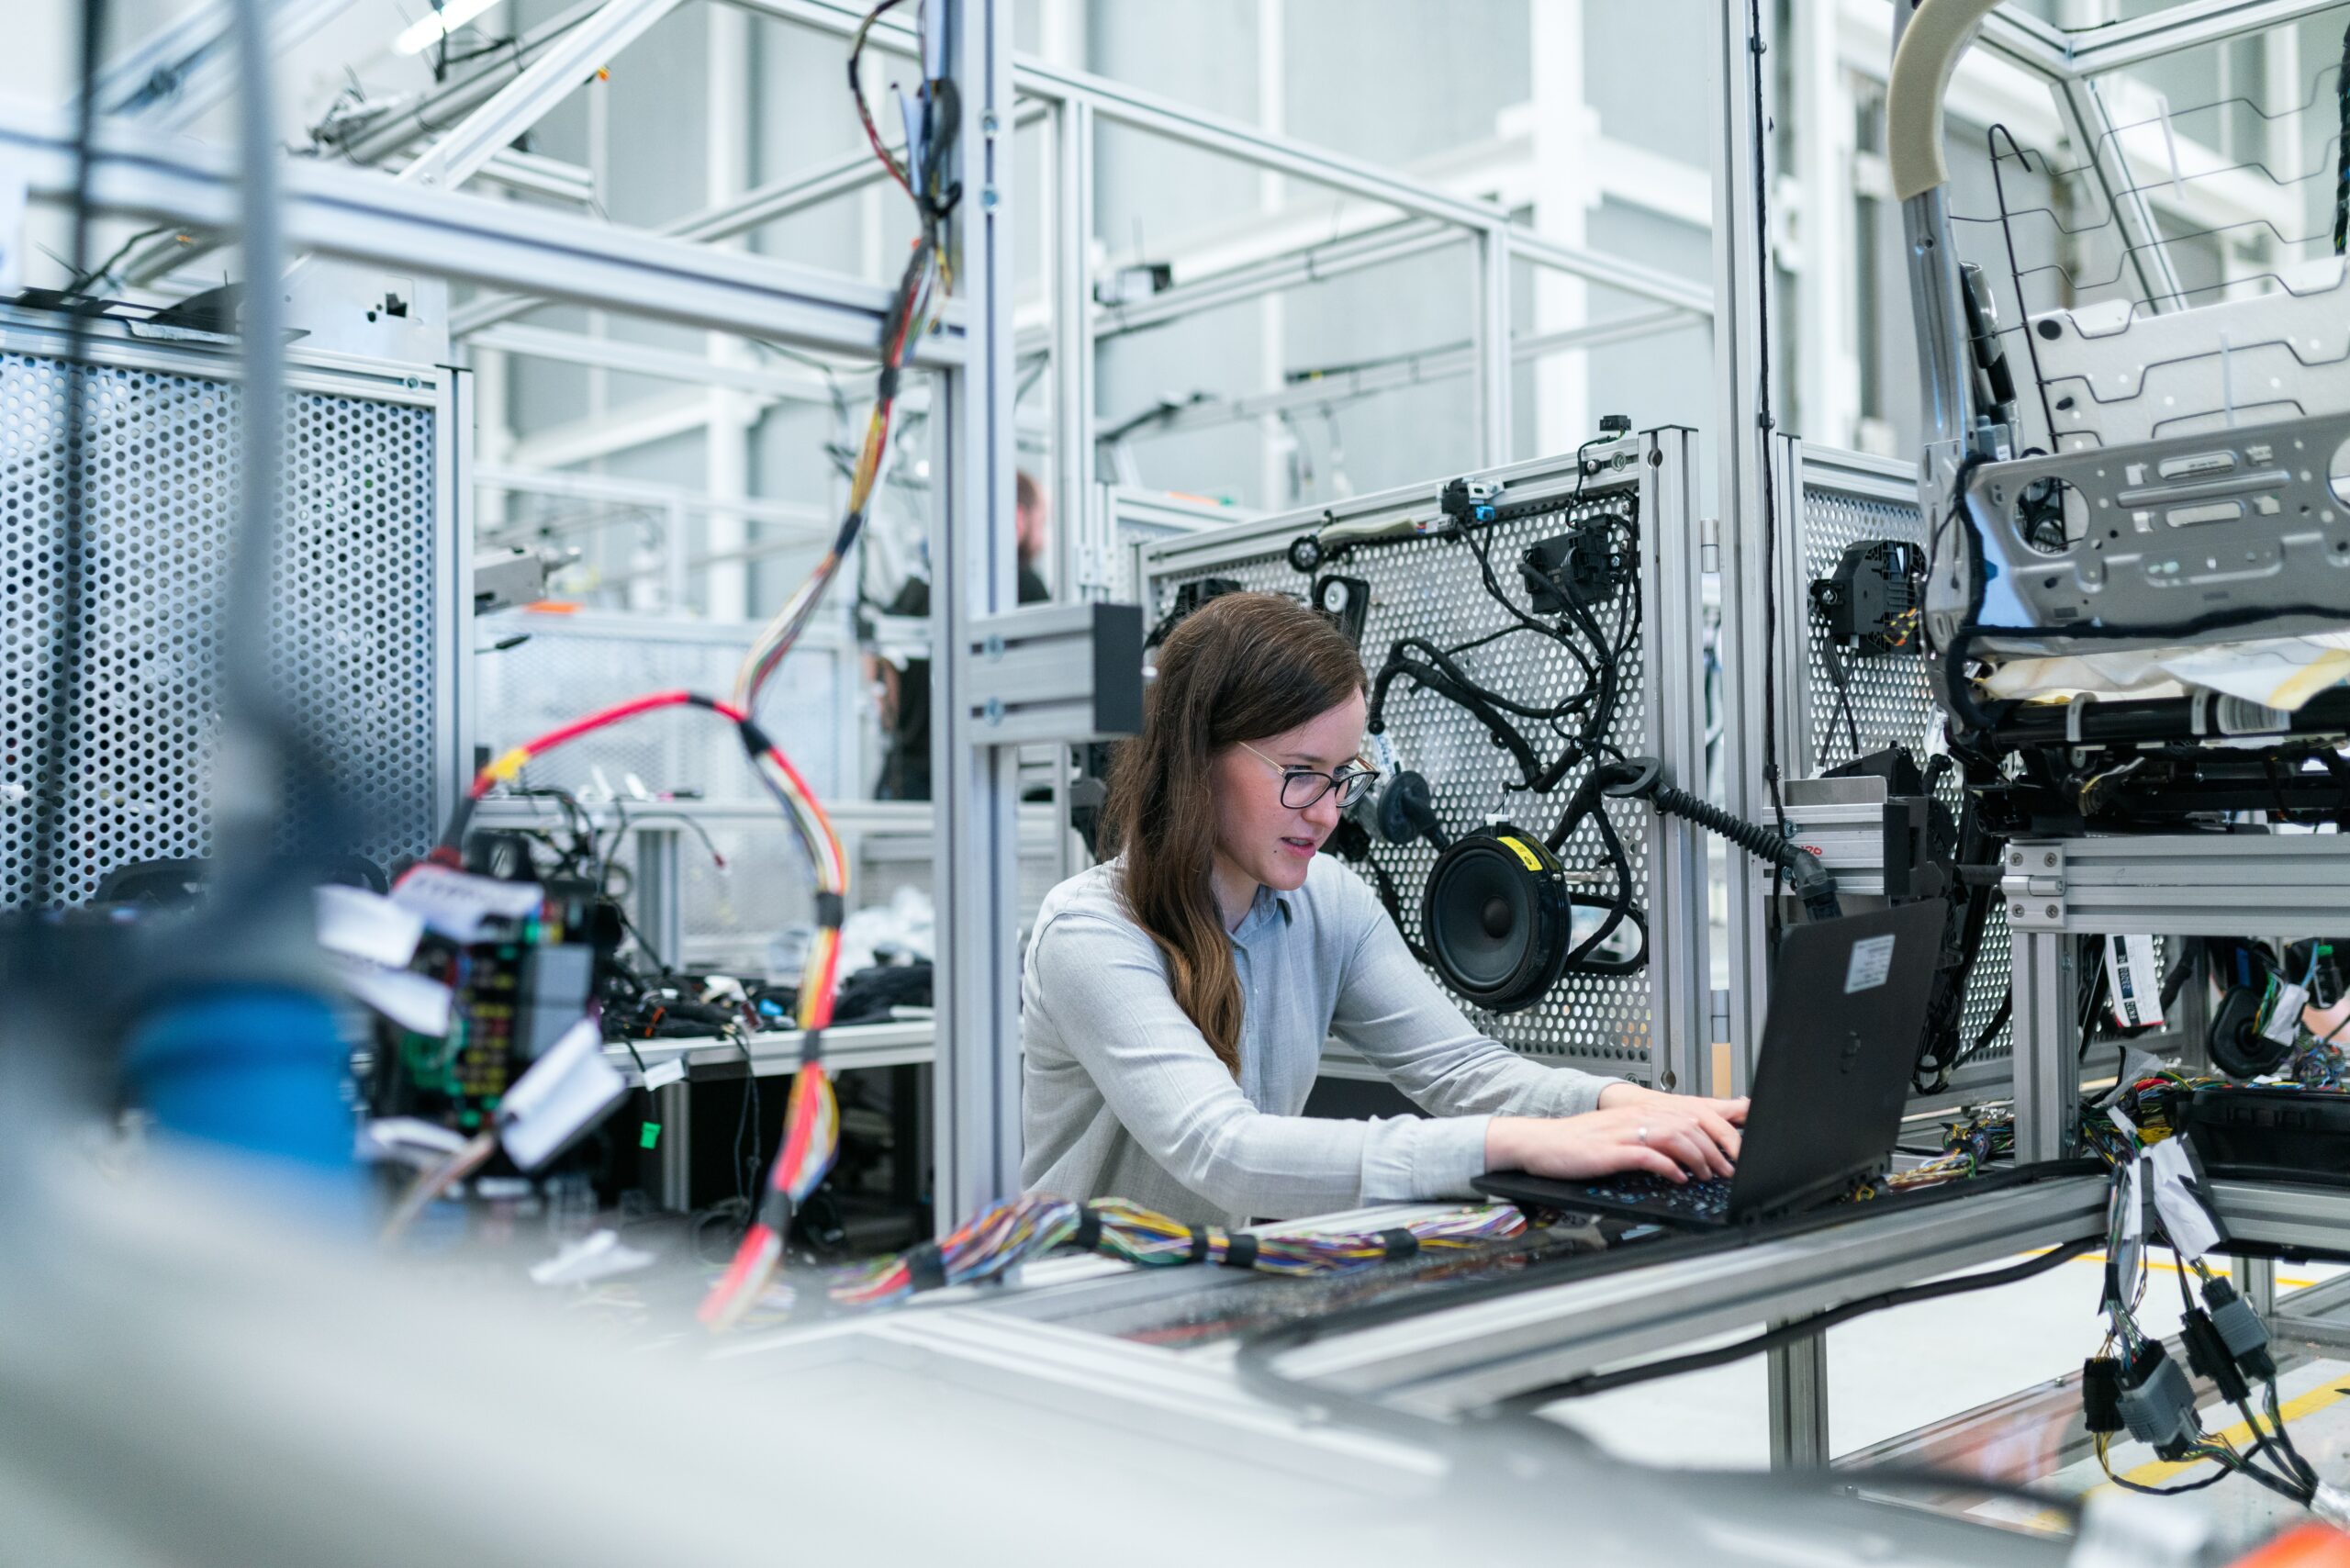 Woman working on computer in tech manufacturing atmosphere.